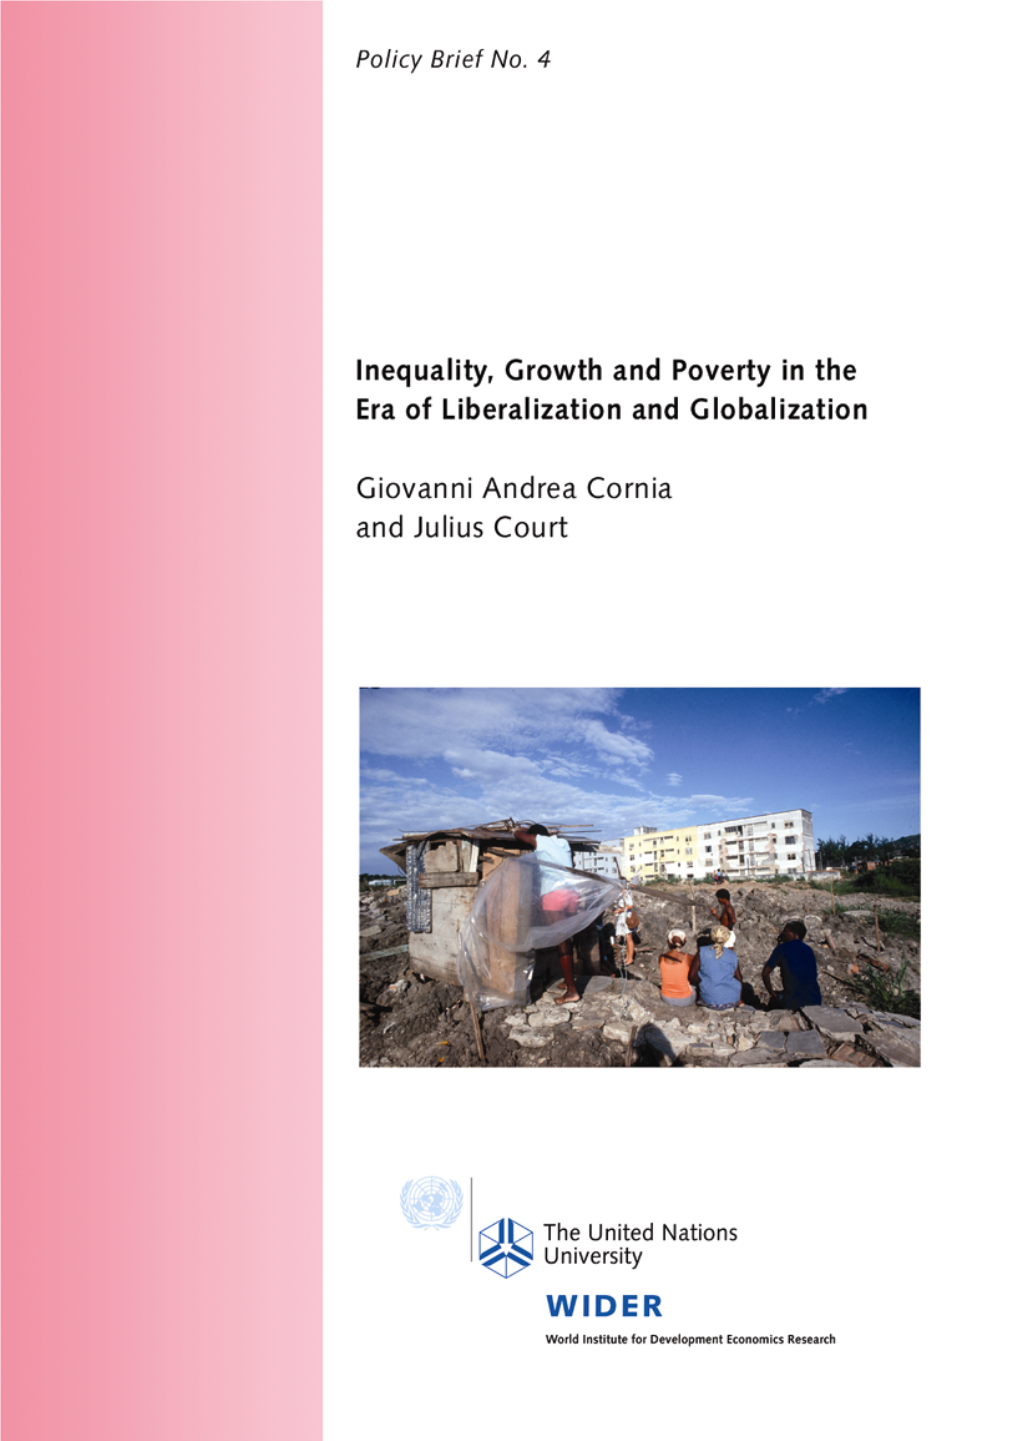 Inequality, Growth and Poverty in the Era of Liberalization and Globalization